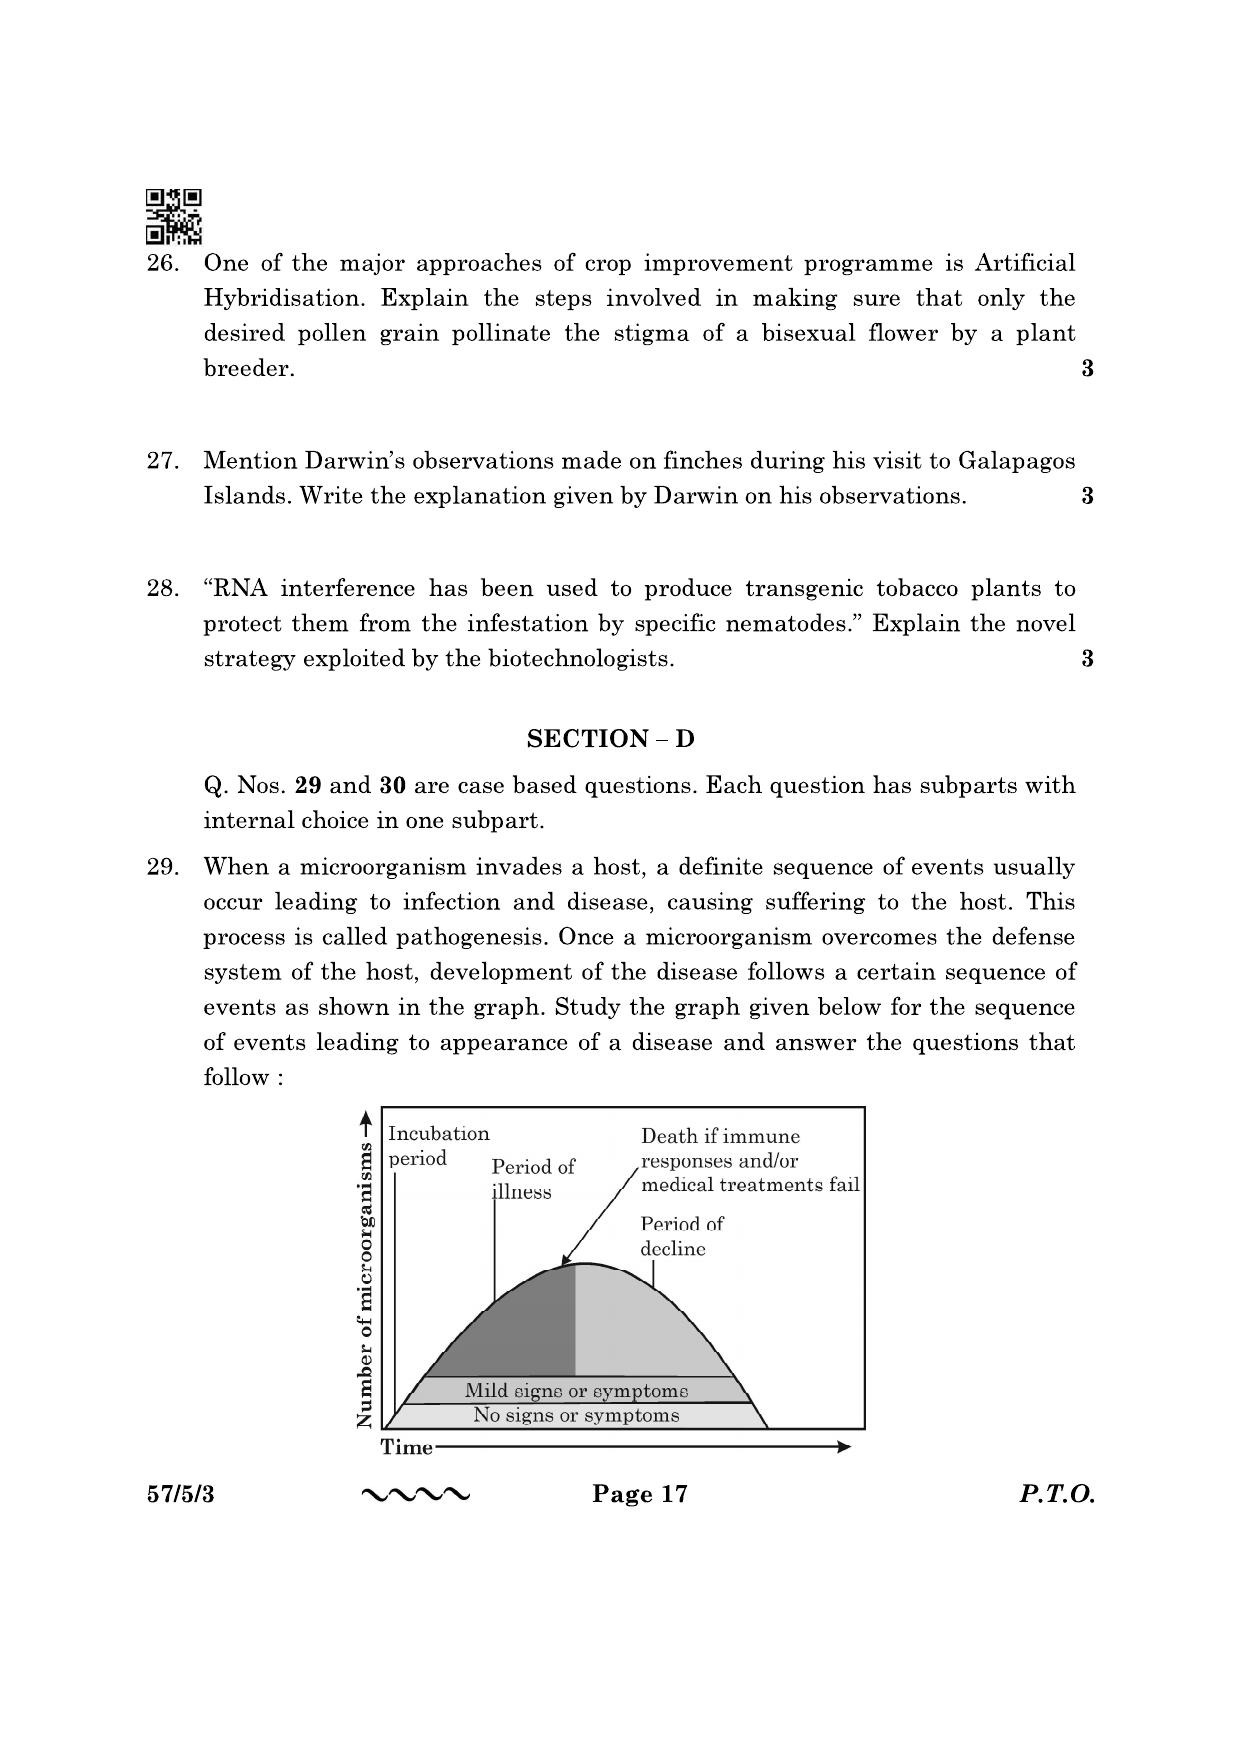 CBSE Class 12 57-5-3 Biology 2023 Question Paper - Page 17